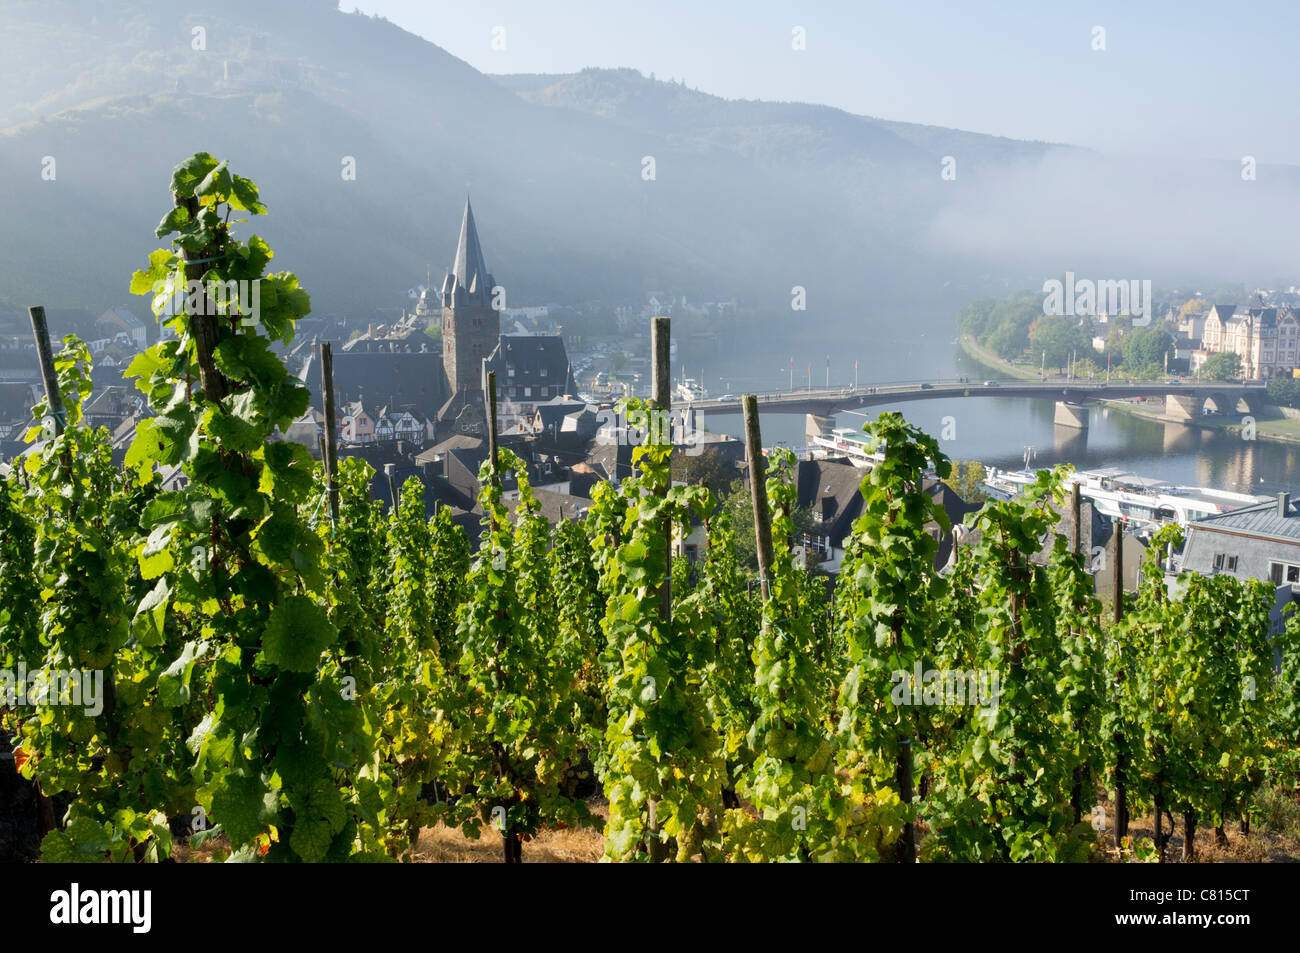 Early morning view of Bernkastel-Kues village from vineyard on River Mosel in Mosel valley in Germany Stock Photo